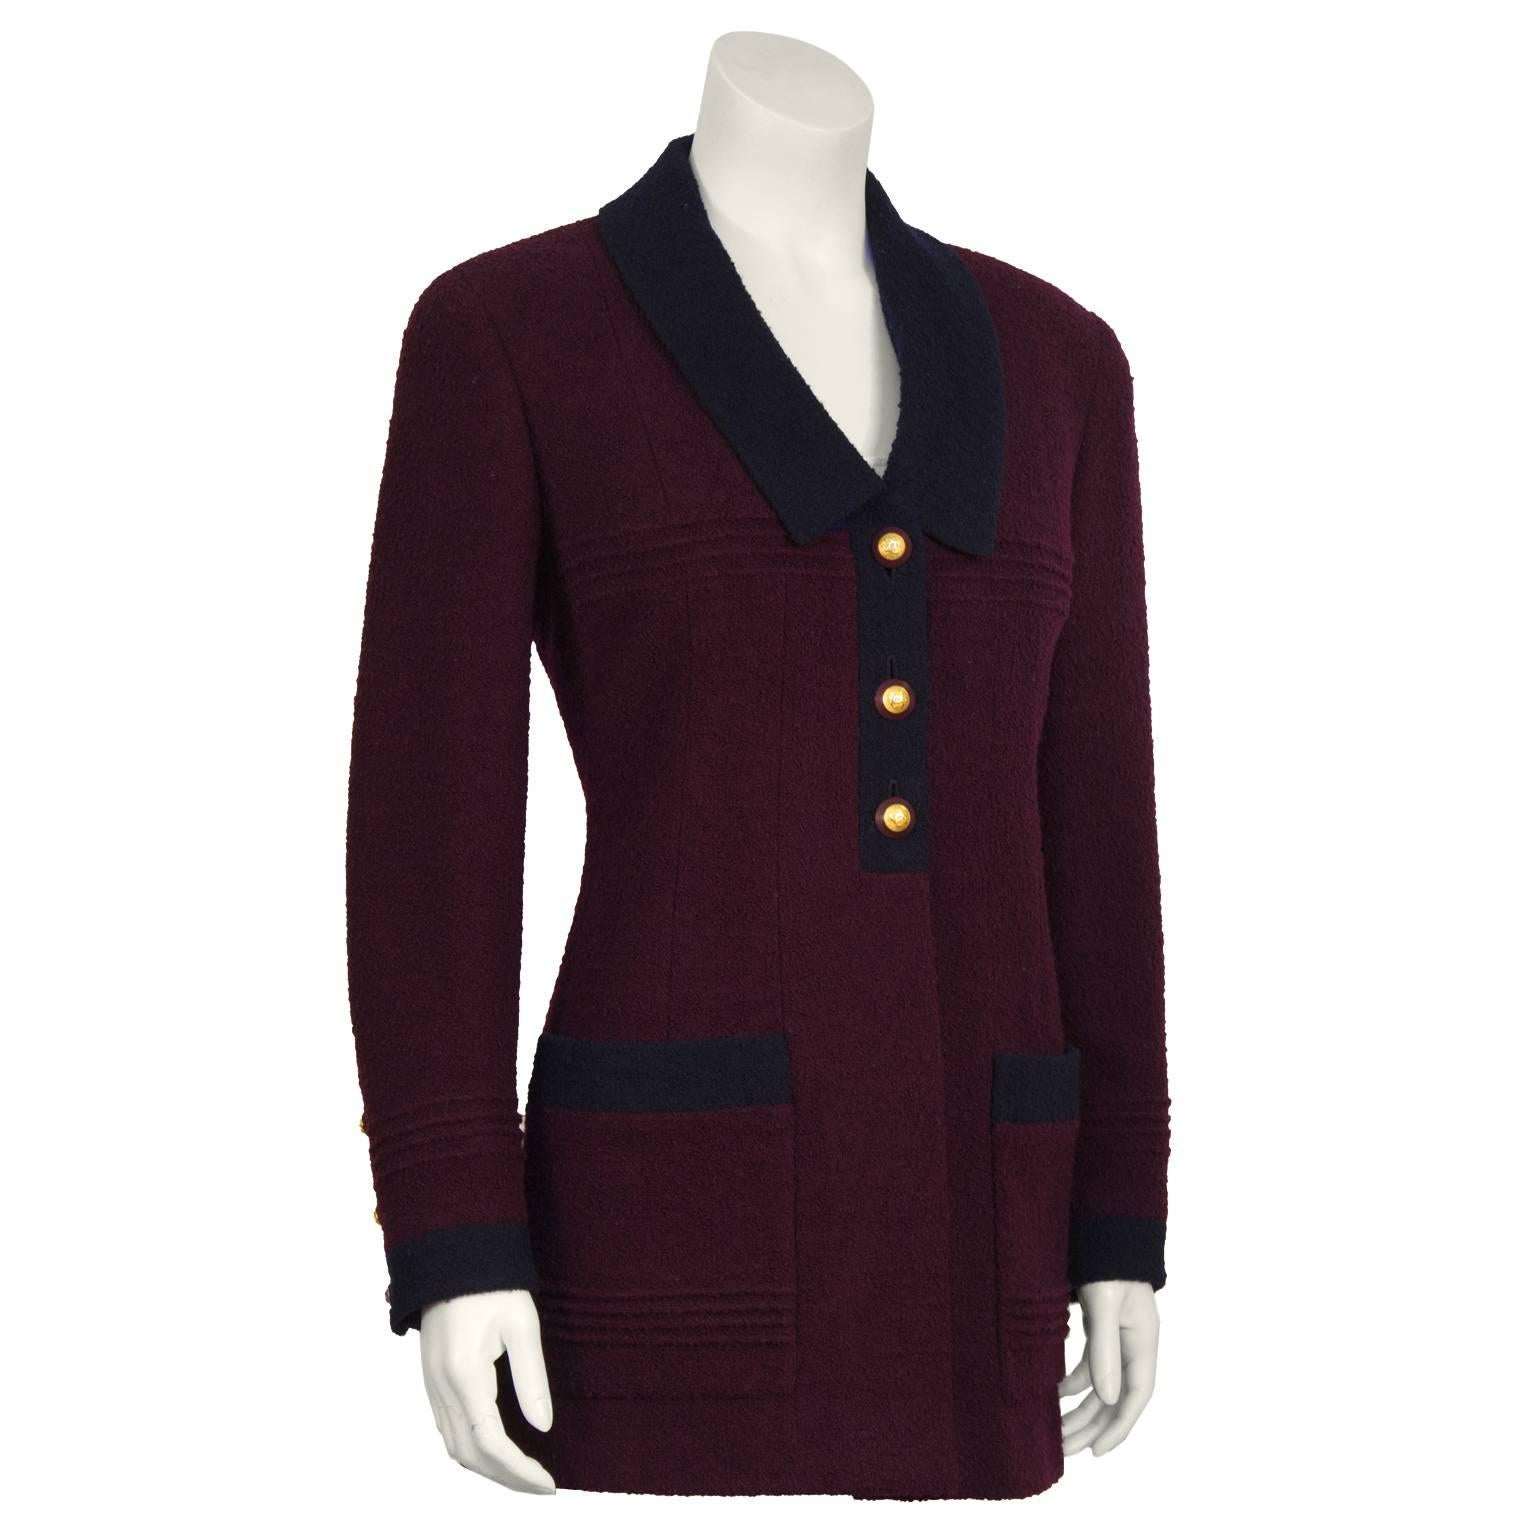 Chanel bordeaux and navy boucle car coat length jacket from the 1980's. The equestrian inspired coat is detailed with a navy Chelsea style collar that finishes with a placket front with three purple and gold circular Chanel buttons finished with two